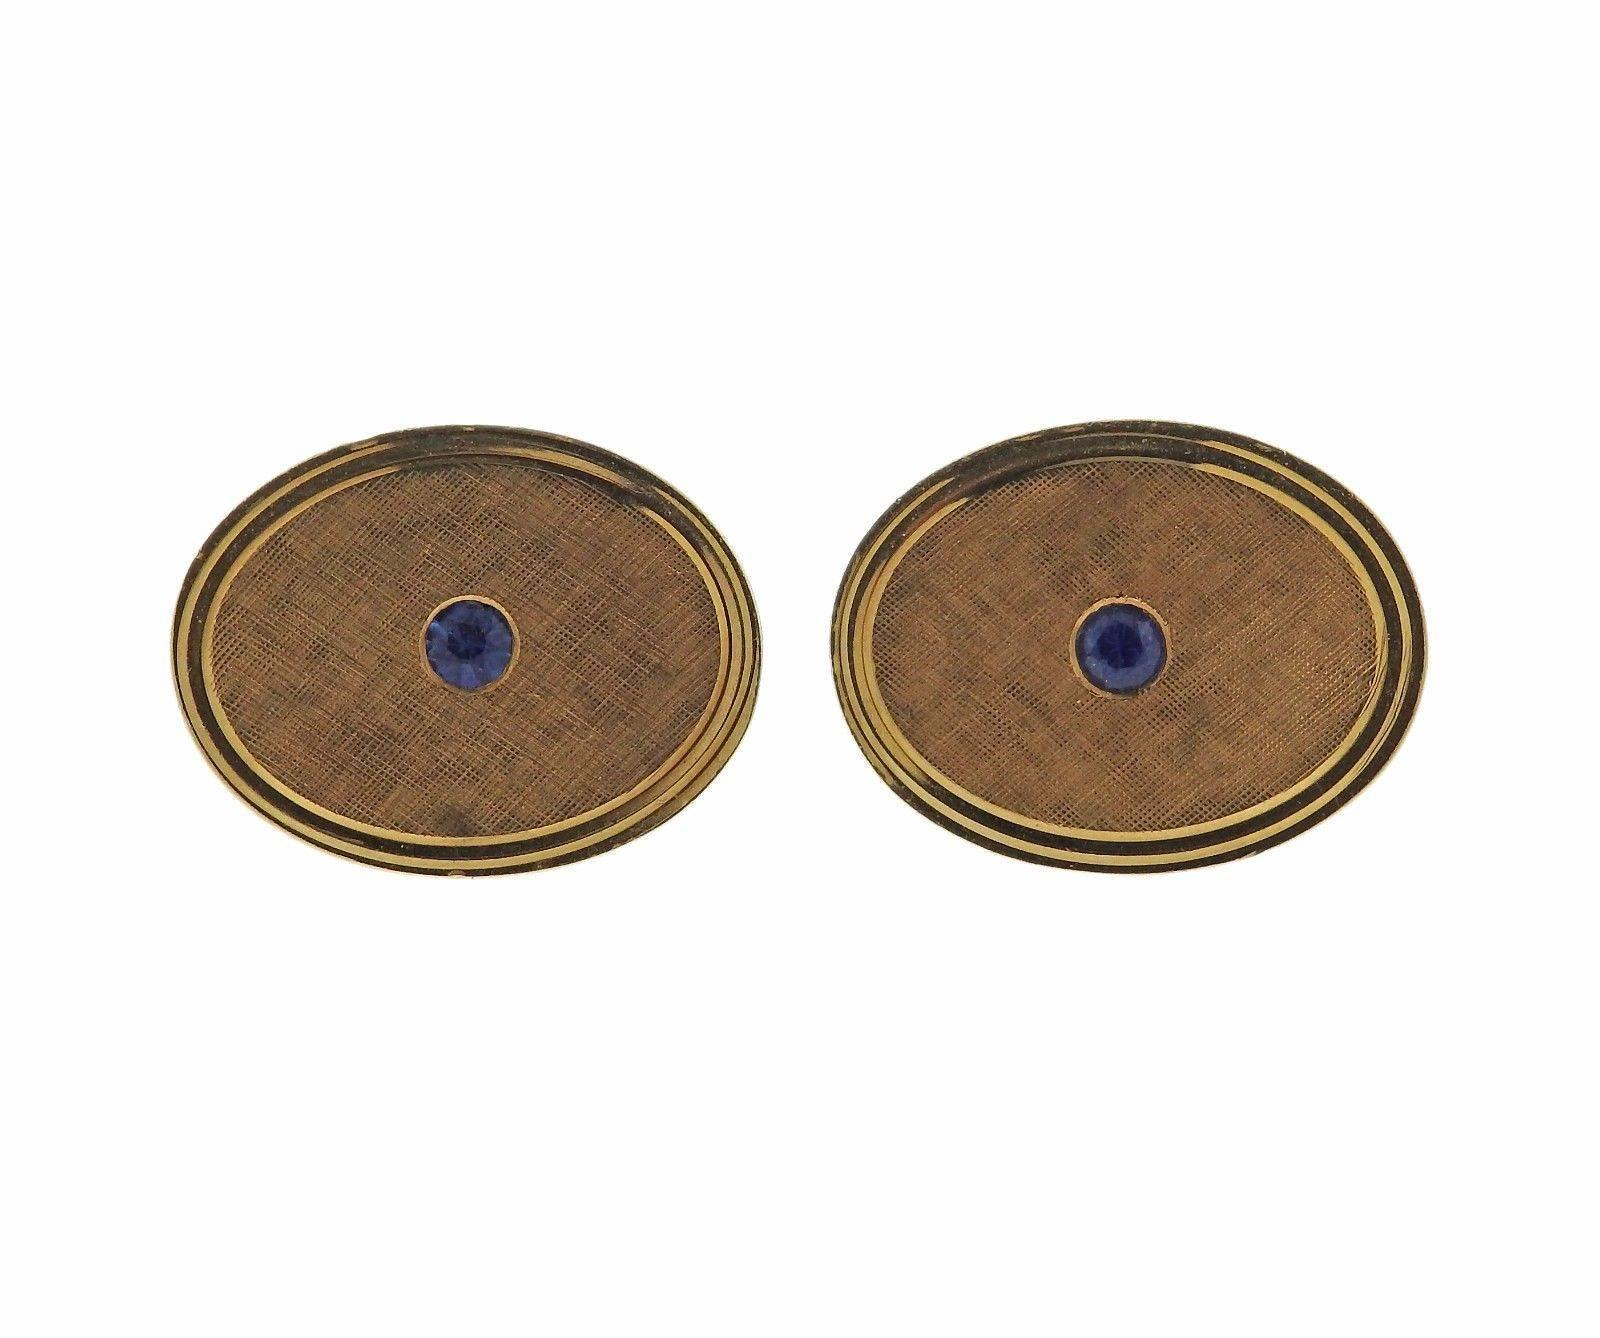 A pair of 14k yellow gold cufflinks set with Montana sapphires.  The cufflinks measure 21mm x 16mm and weigh 15.1 grams.  Marked: 14k, Tiffany.